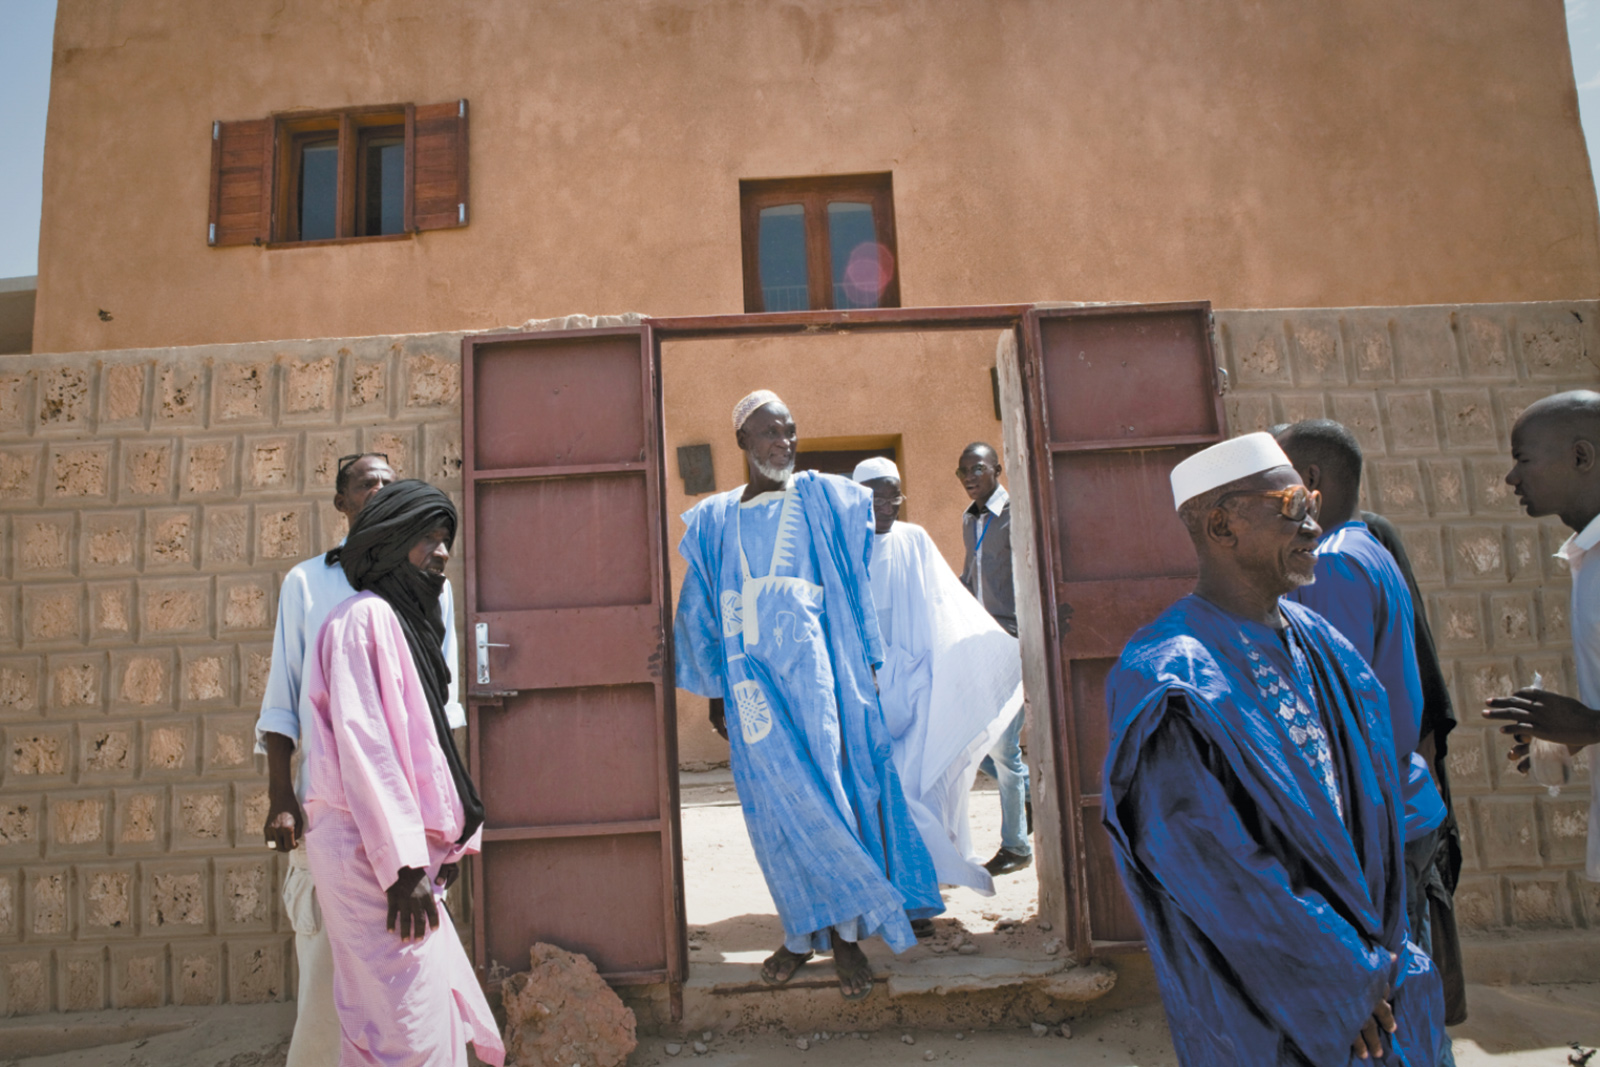 Community leaders leaving a ceremony honoring Timbuktu’s Crisis Committee, formed the year before to mediate between the civilian population and the jihadists during the Islamist takeover, October 2013